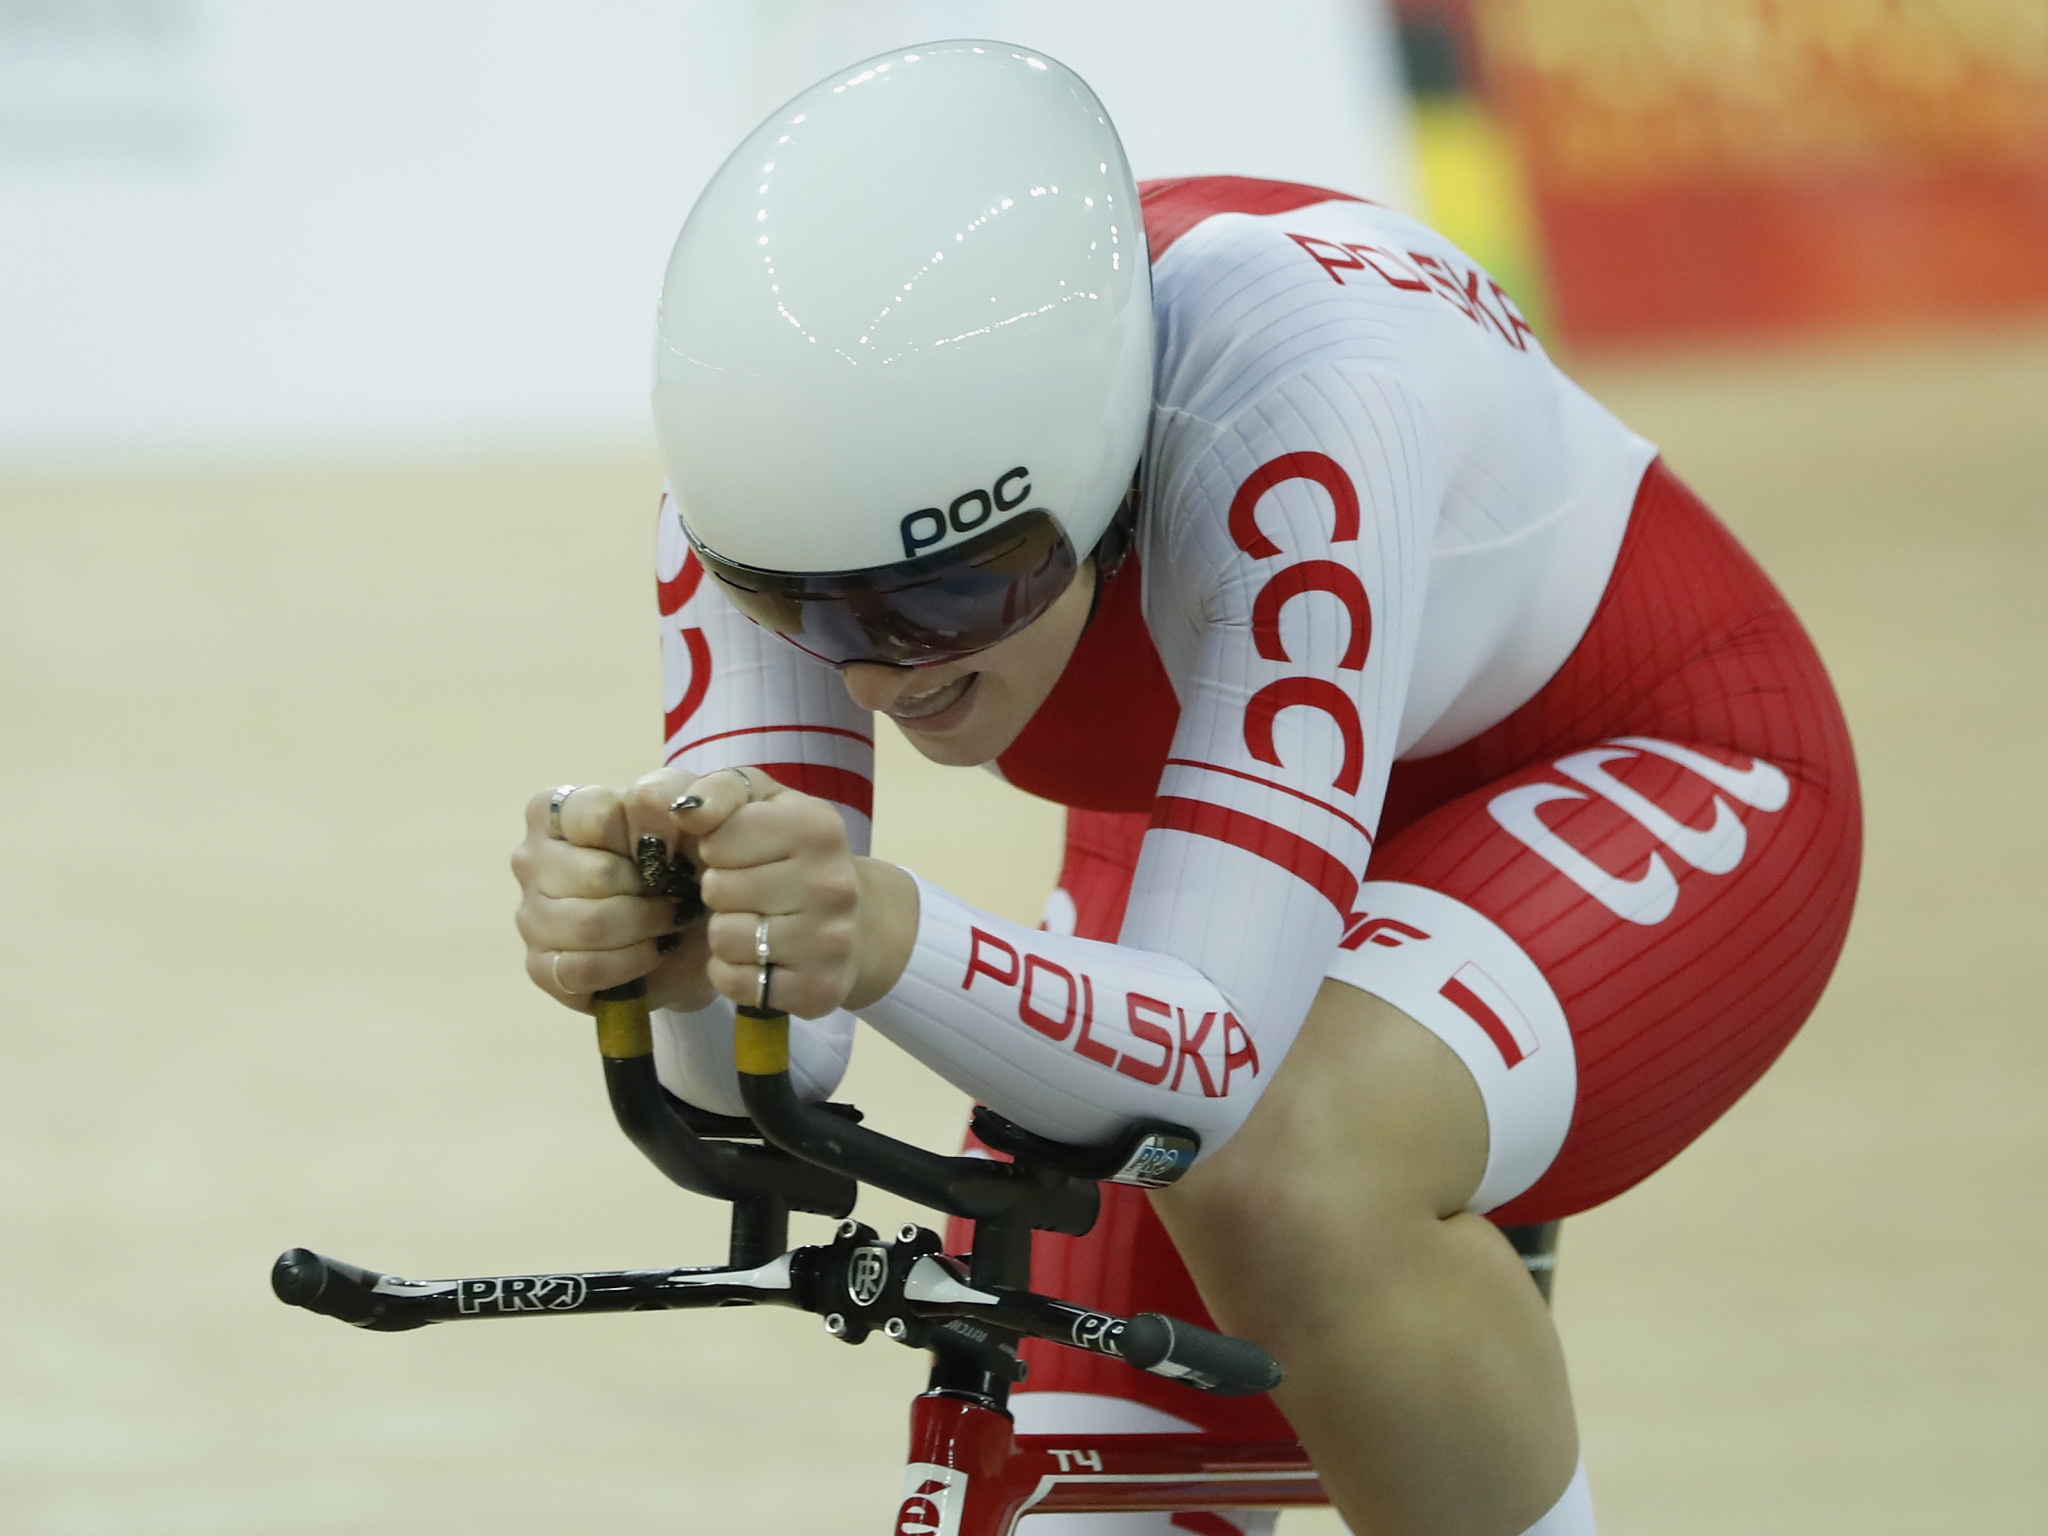 Home favourite, Poland's Justyna Kaczkowska, won gold in the individual pursuit ©UCI